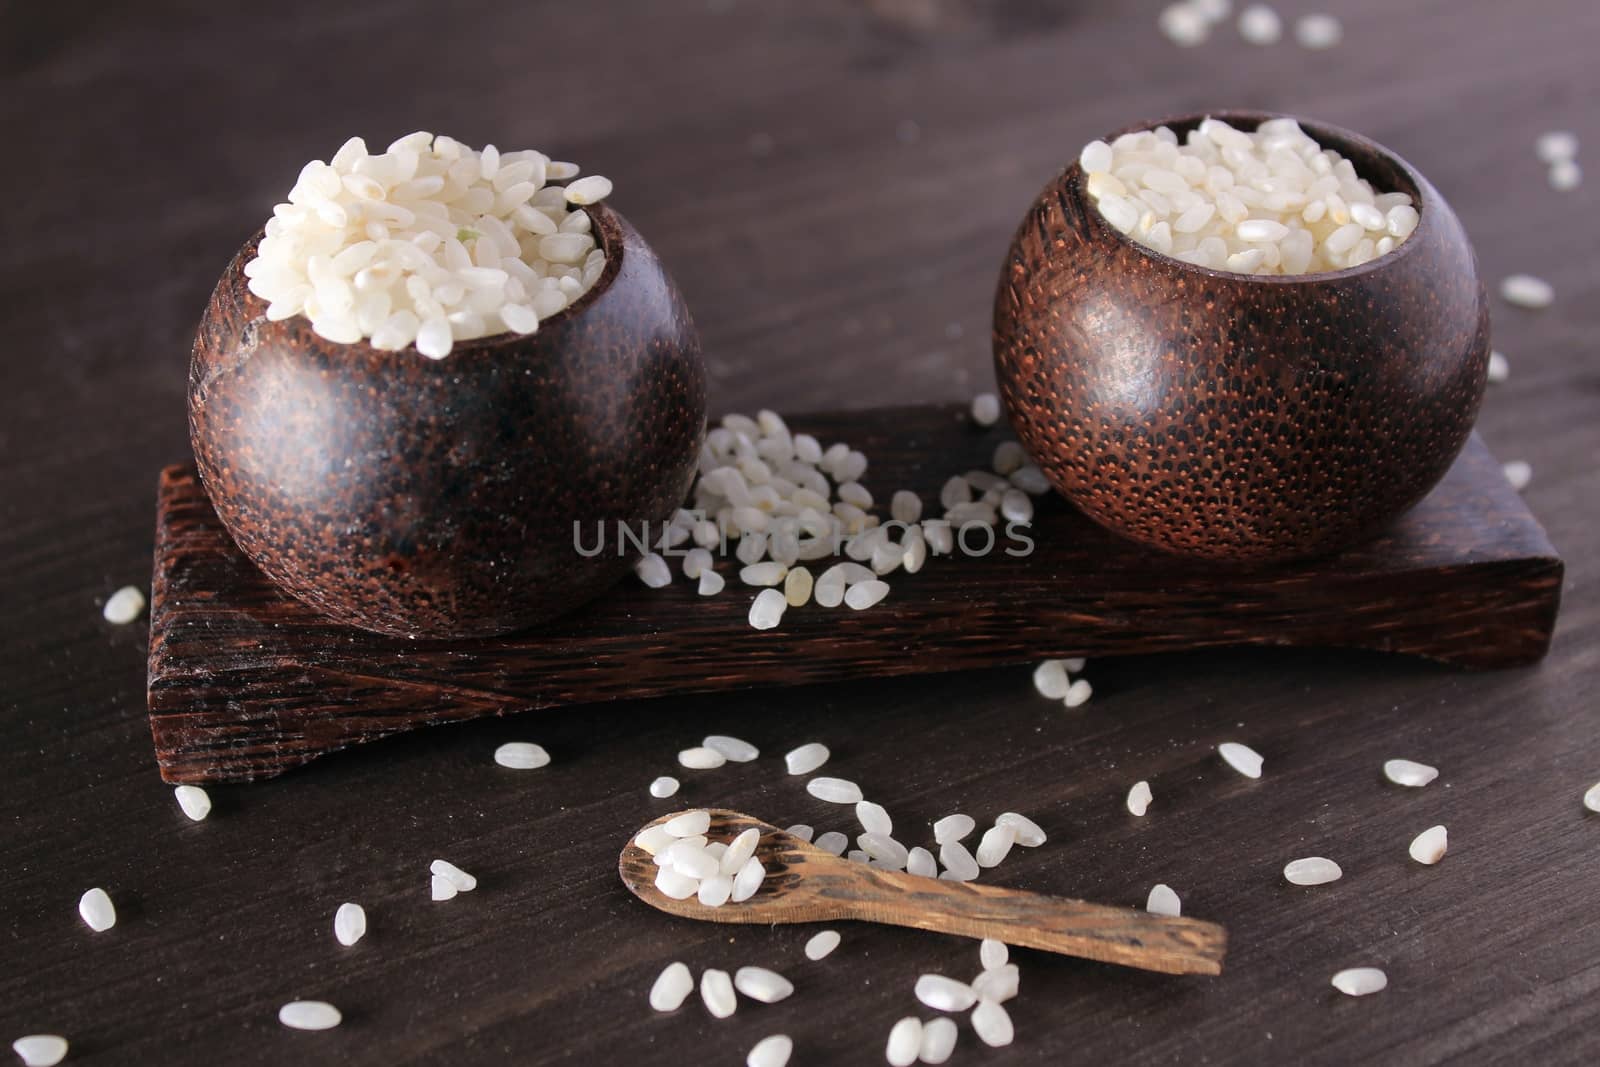 Small wooden bowls plenty with white rice. Little spoon on the table